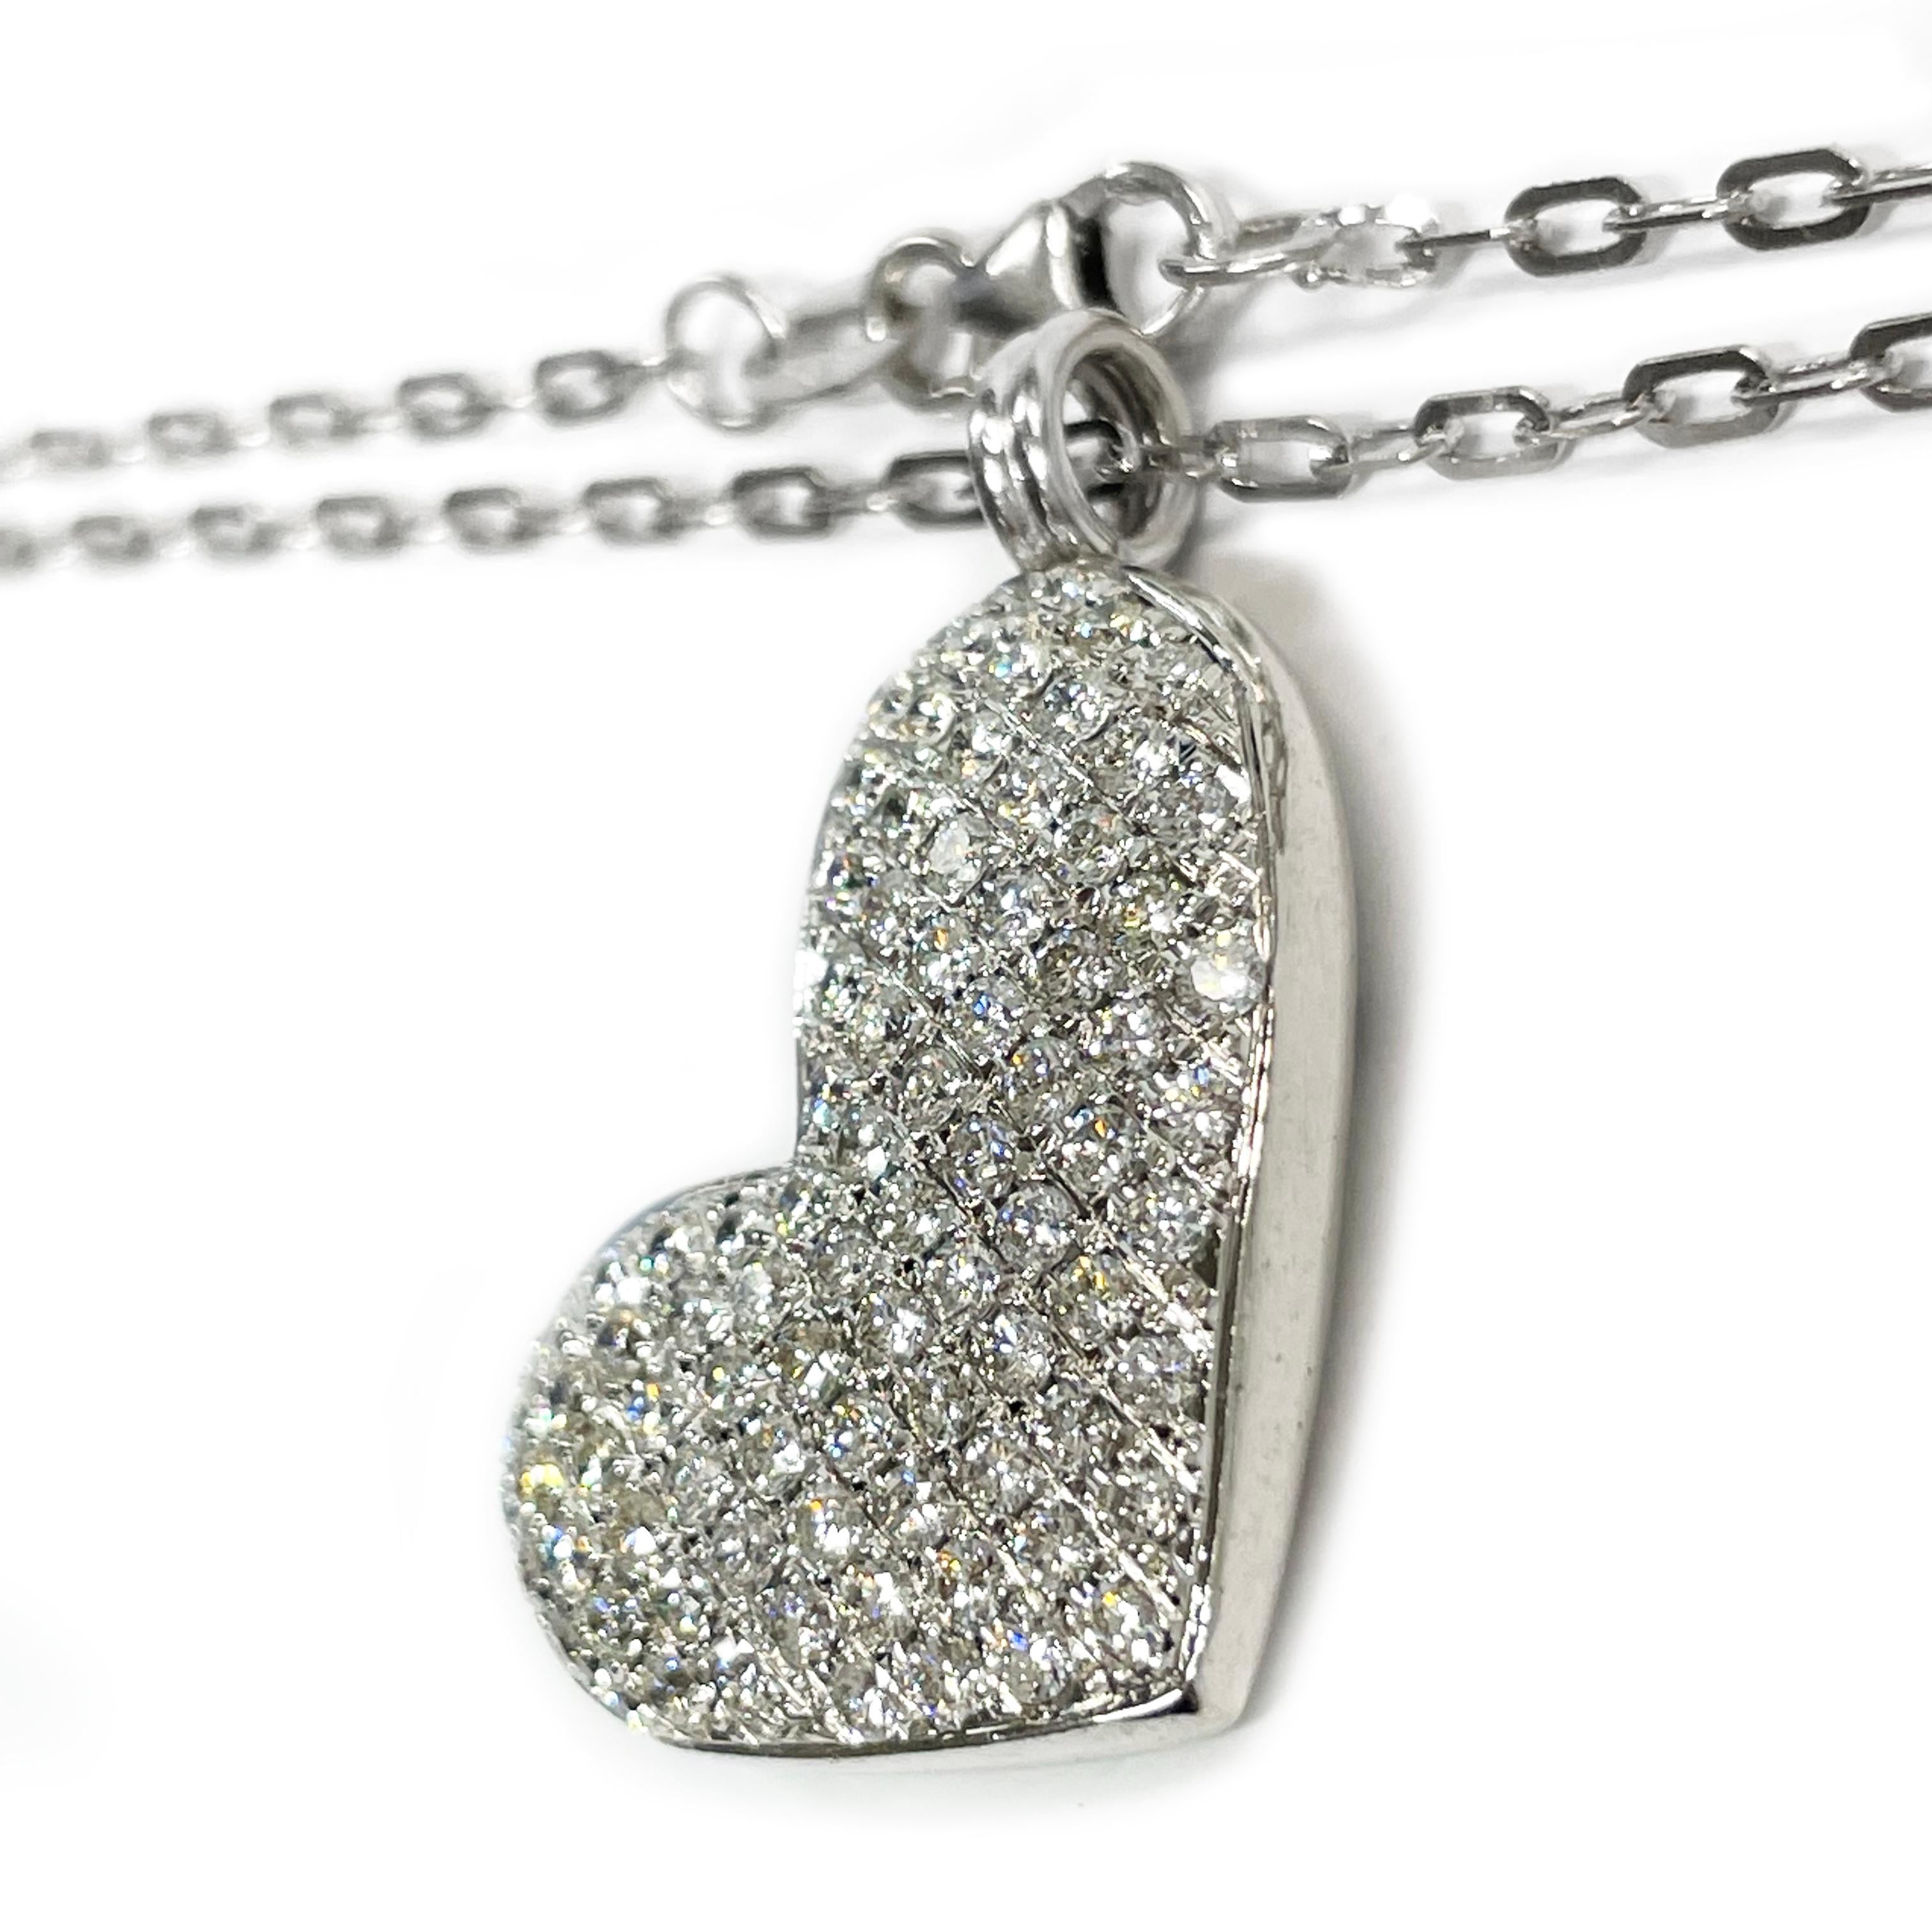 14 Karat White Gold Diamond Pave Heart Pendant Necklace. The pendant is heart-shaped with eighty-seven round 1.72mm brilliant-cut pave-set diamonds and attached bail. The diamonds have a total carat weight of 1.75ctw. The chain is 16